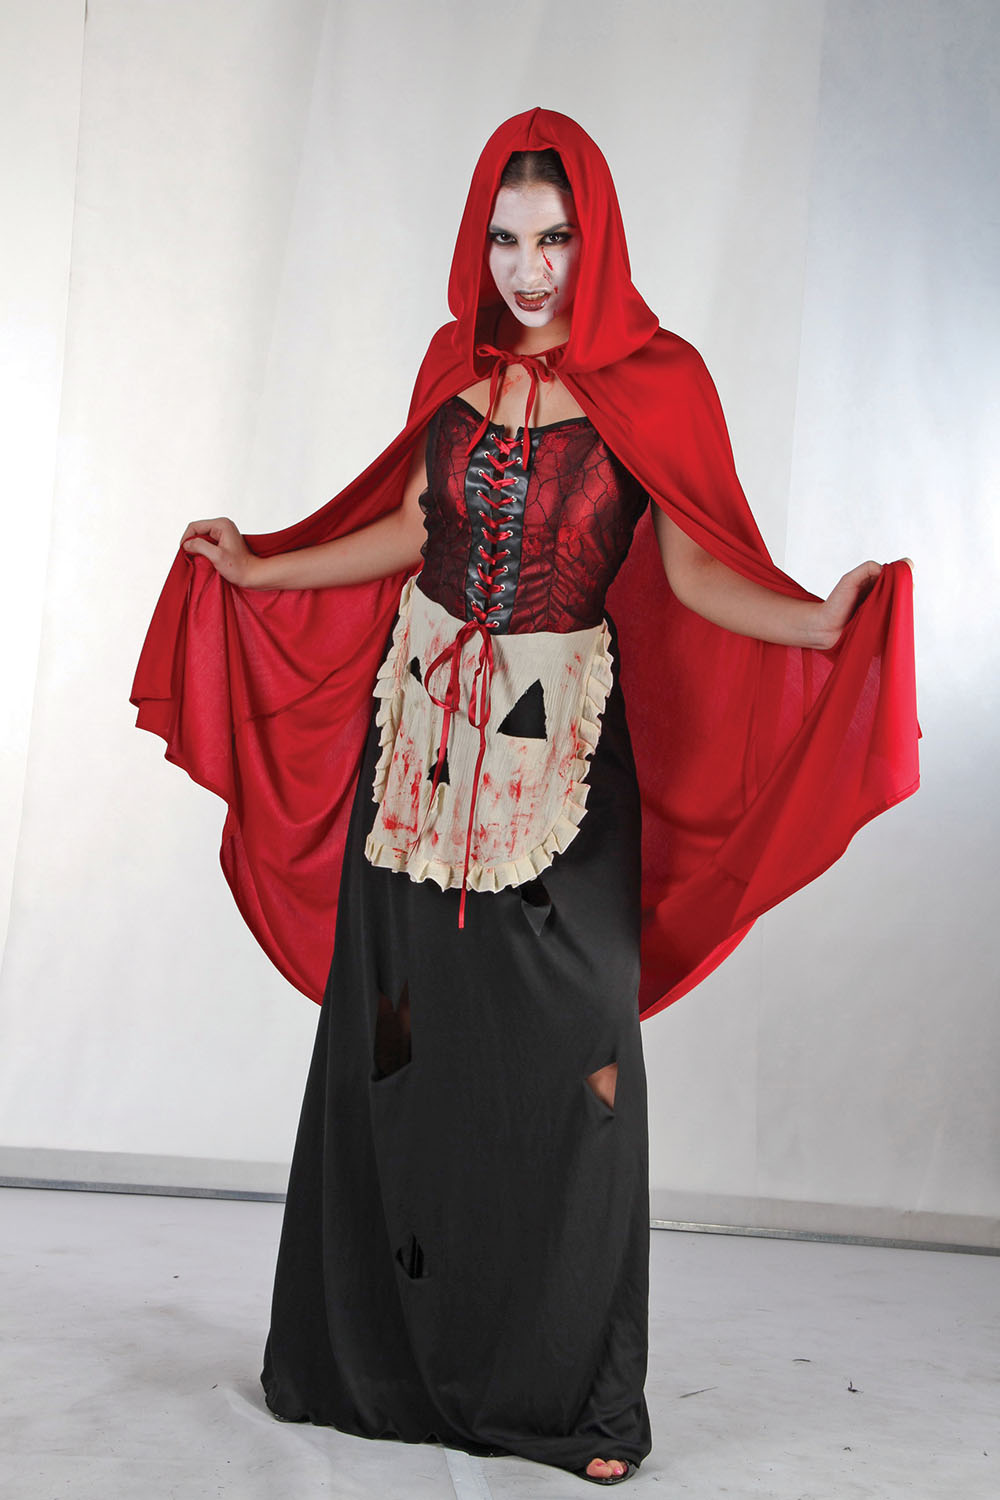 Wicked Red Riding Hood